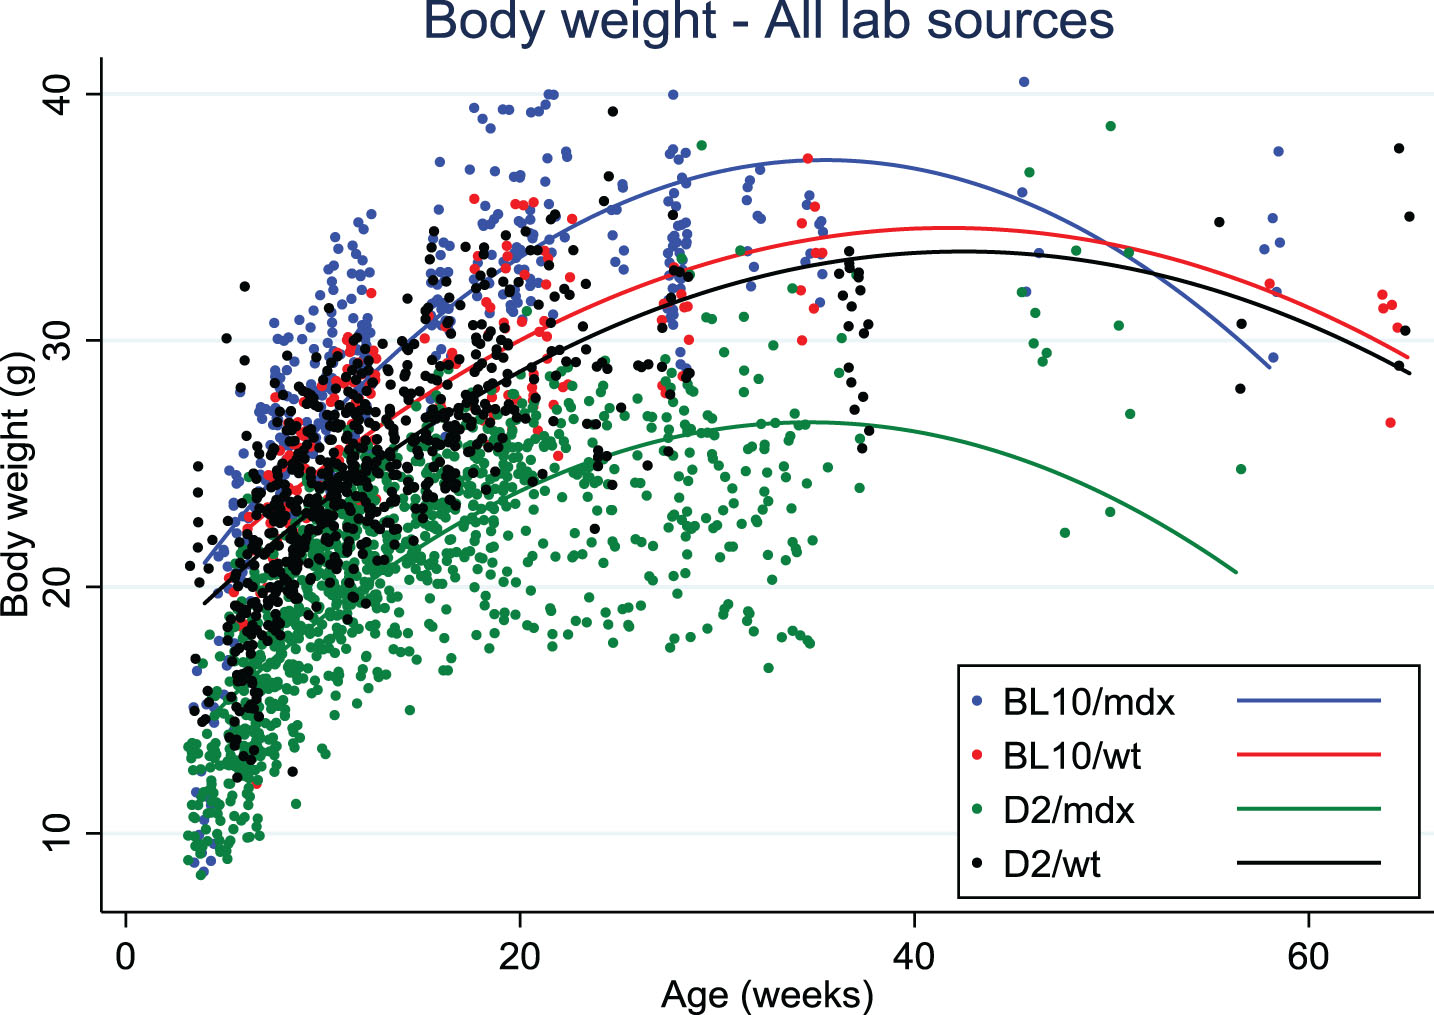 Body weight distribution over age in Bl10/mdx (blue line), Bl10/wt (red line), D2/mdx (green line), D2/wt (black line). Data were collected from 8 labs.